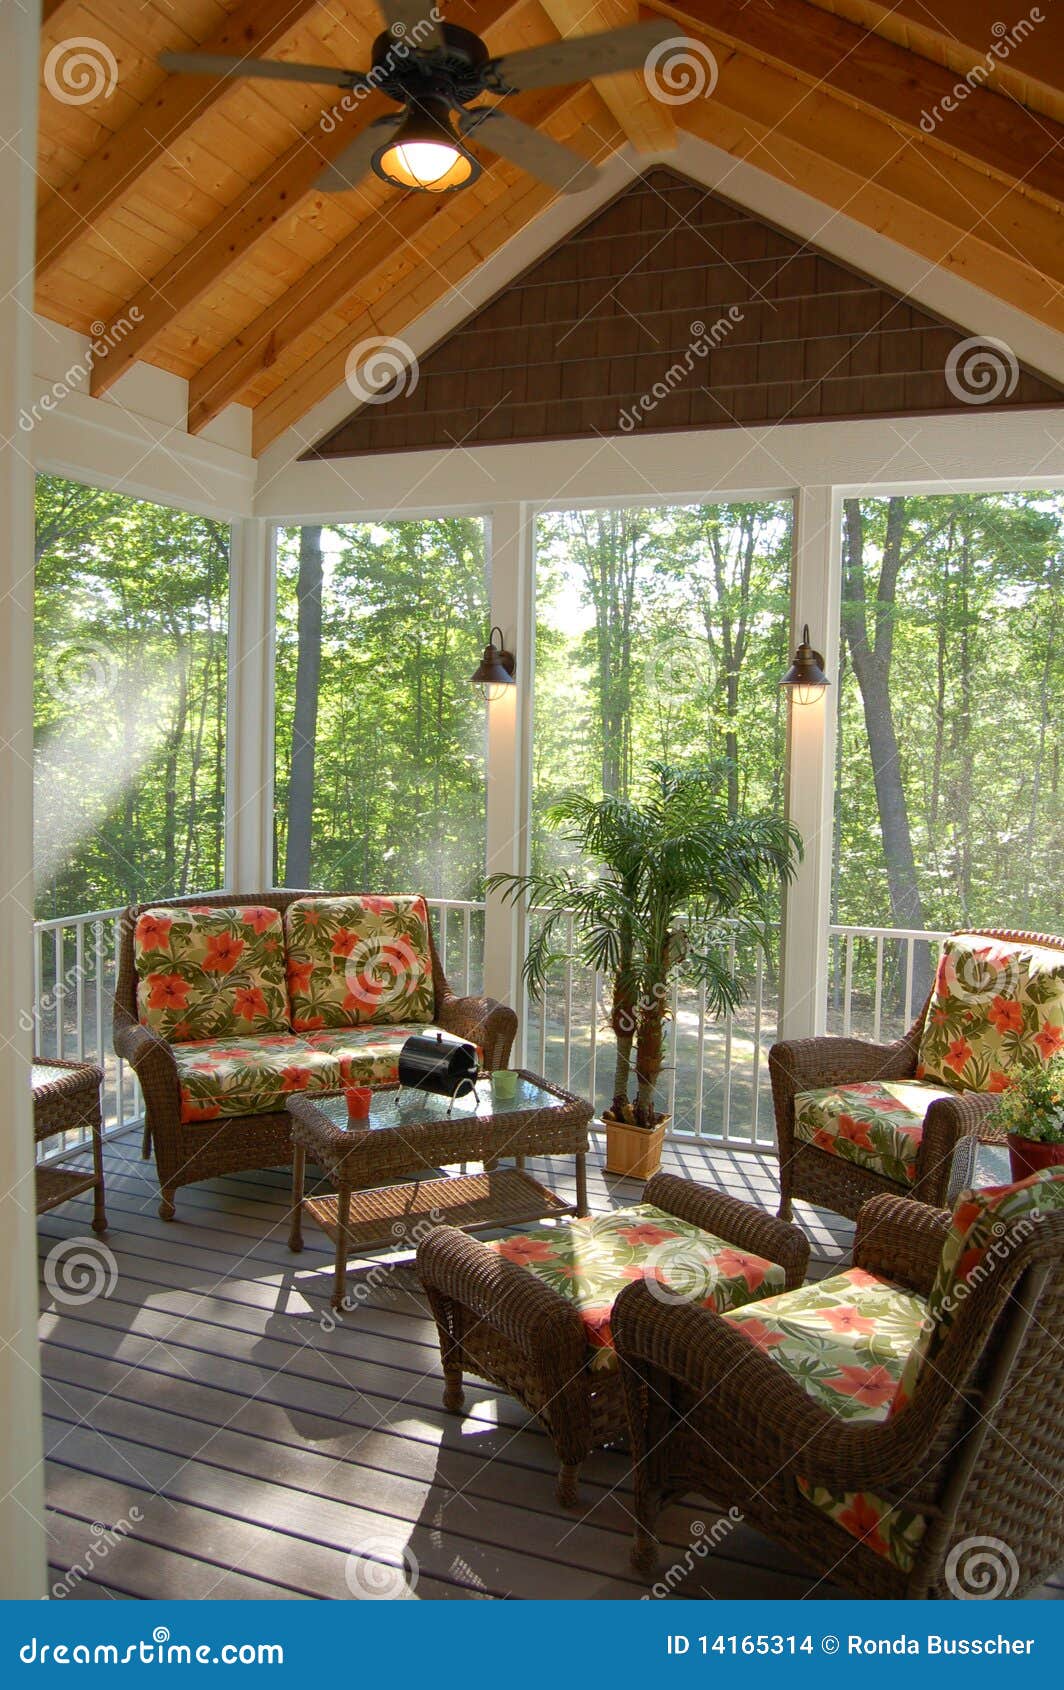 Screened In Porch Deck Stock Images - Image: 14165314